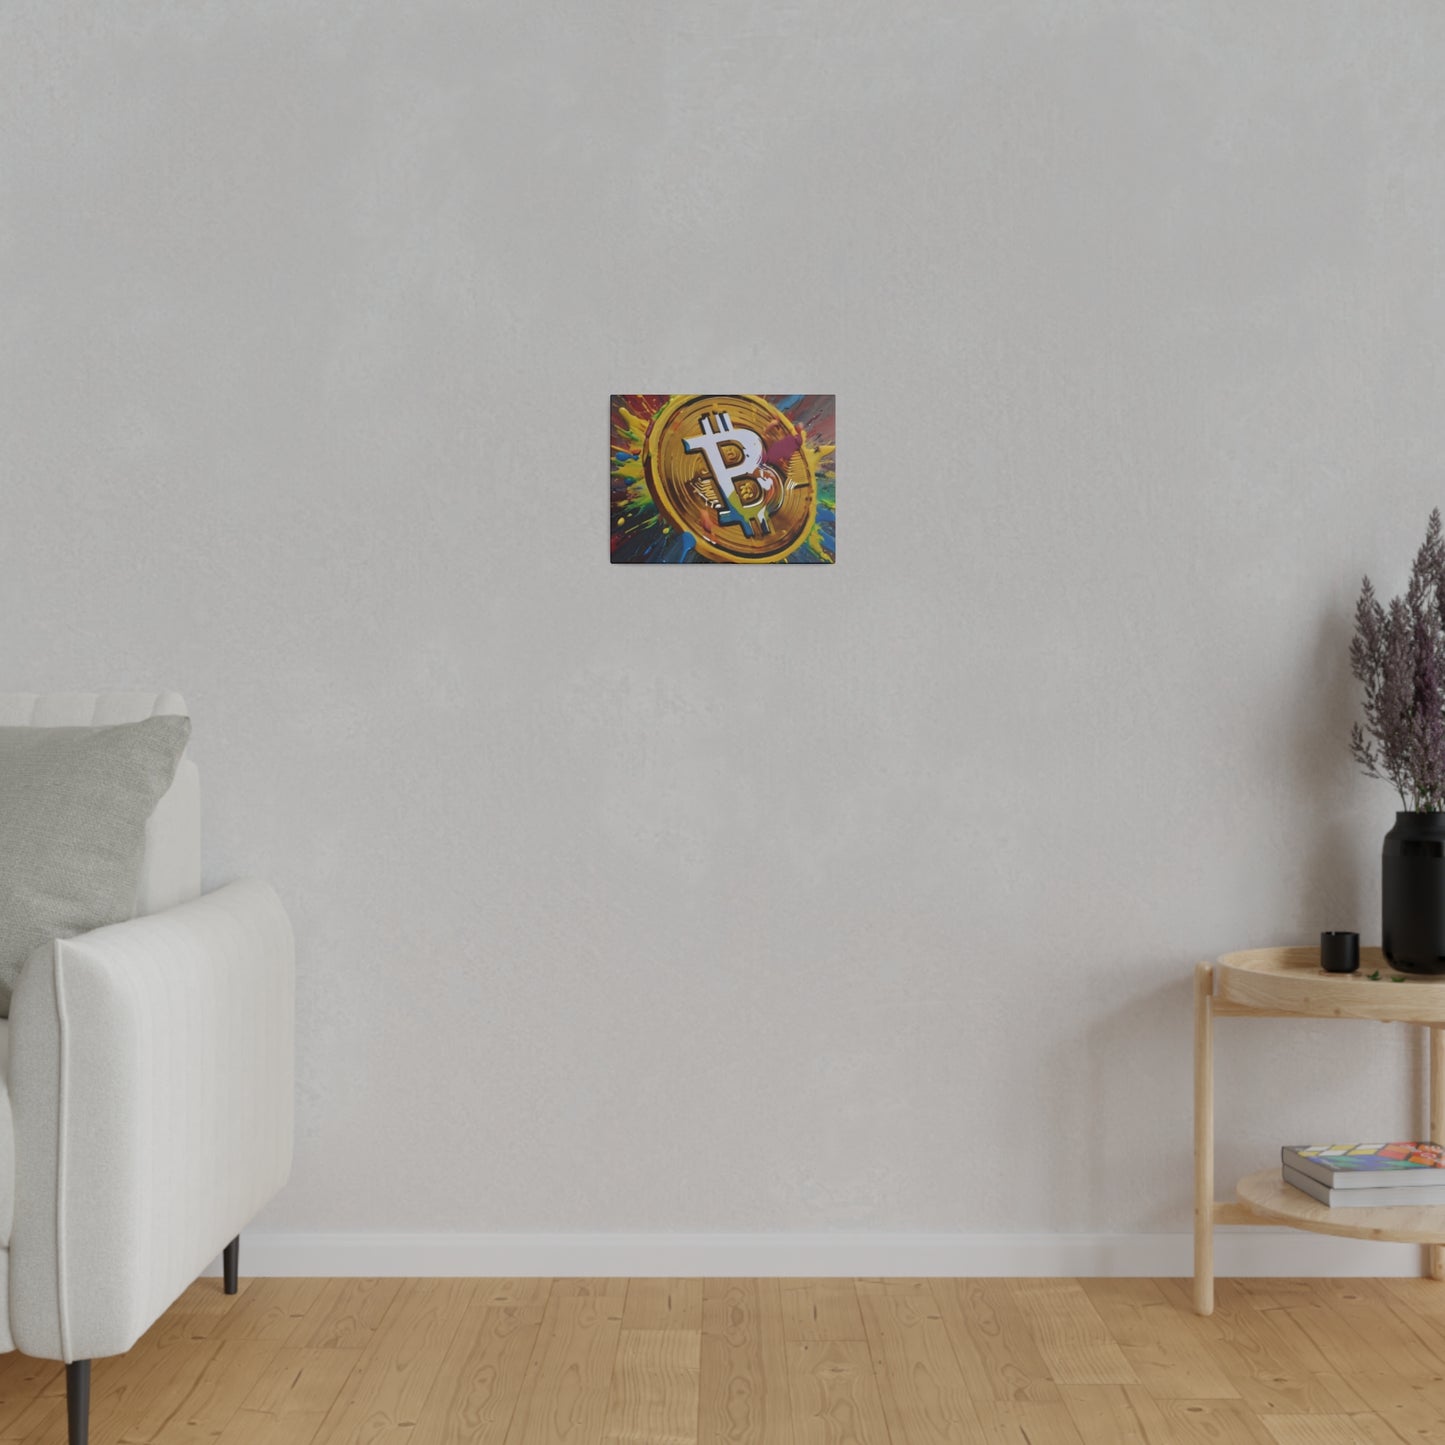 Messy Painted Bitcoin Canvas - Matte Canvas, Stretched, 0.75"